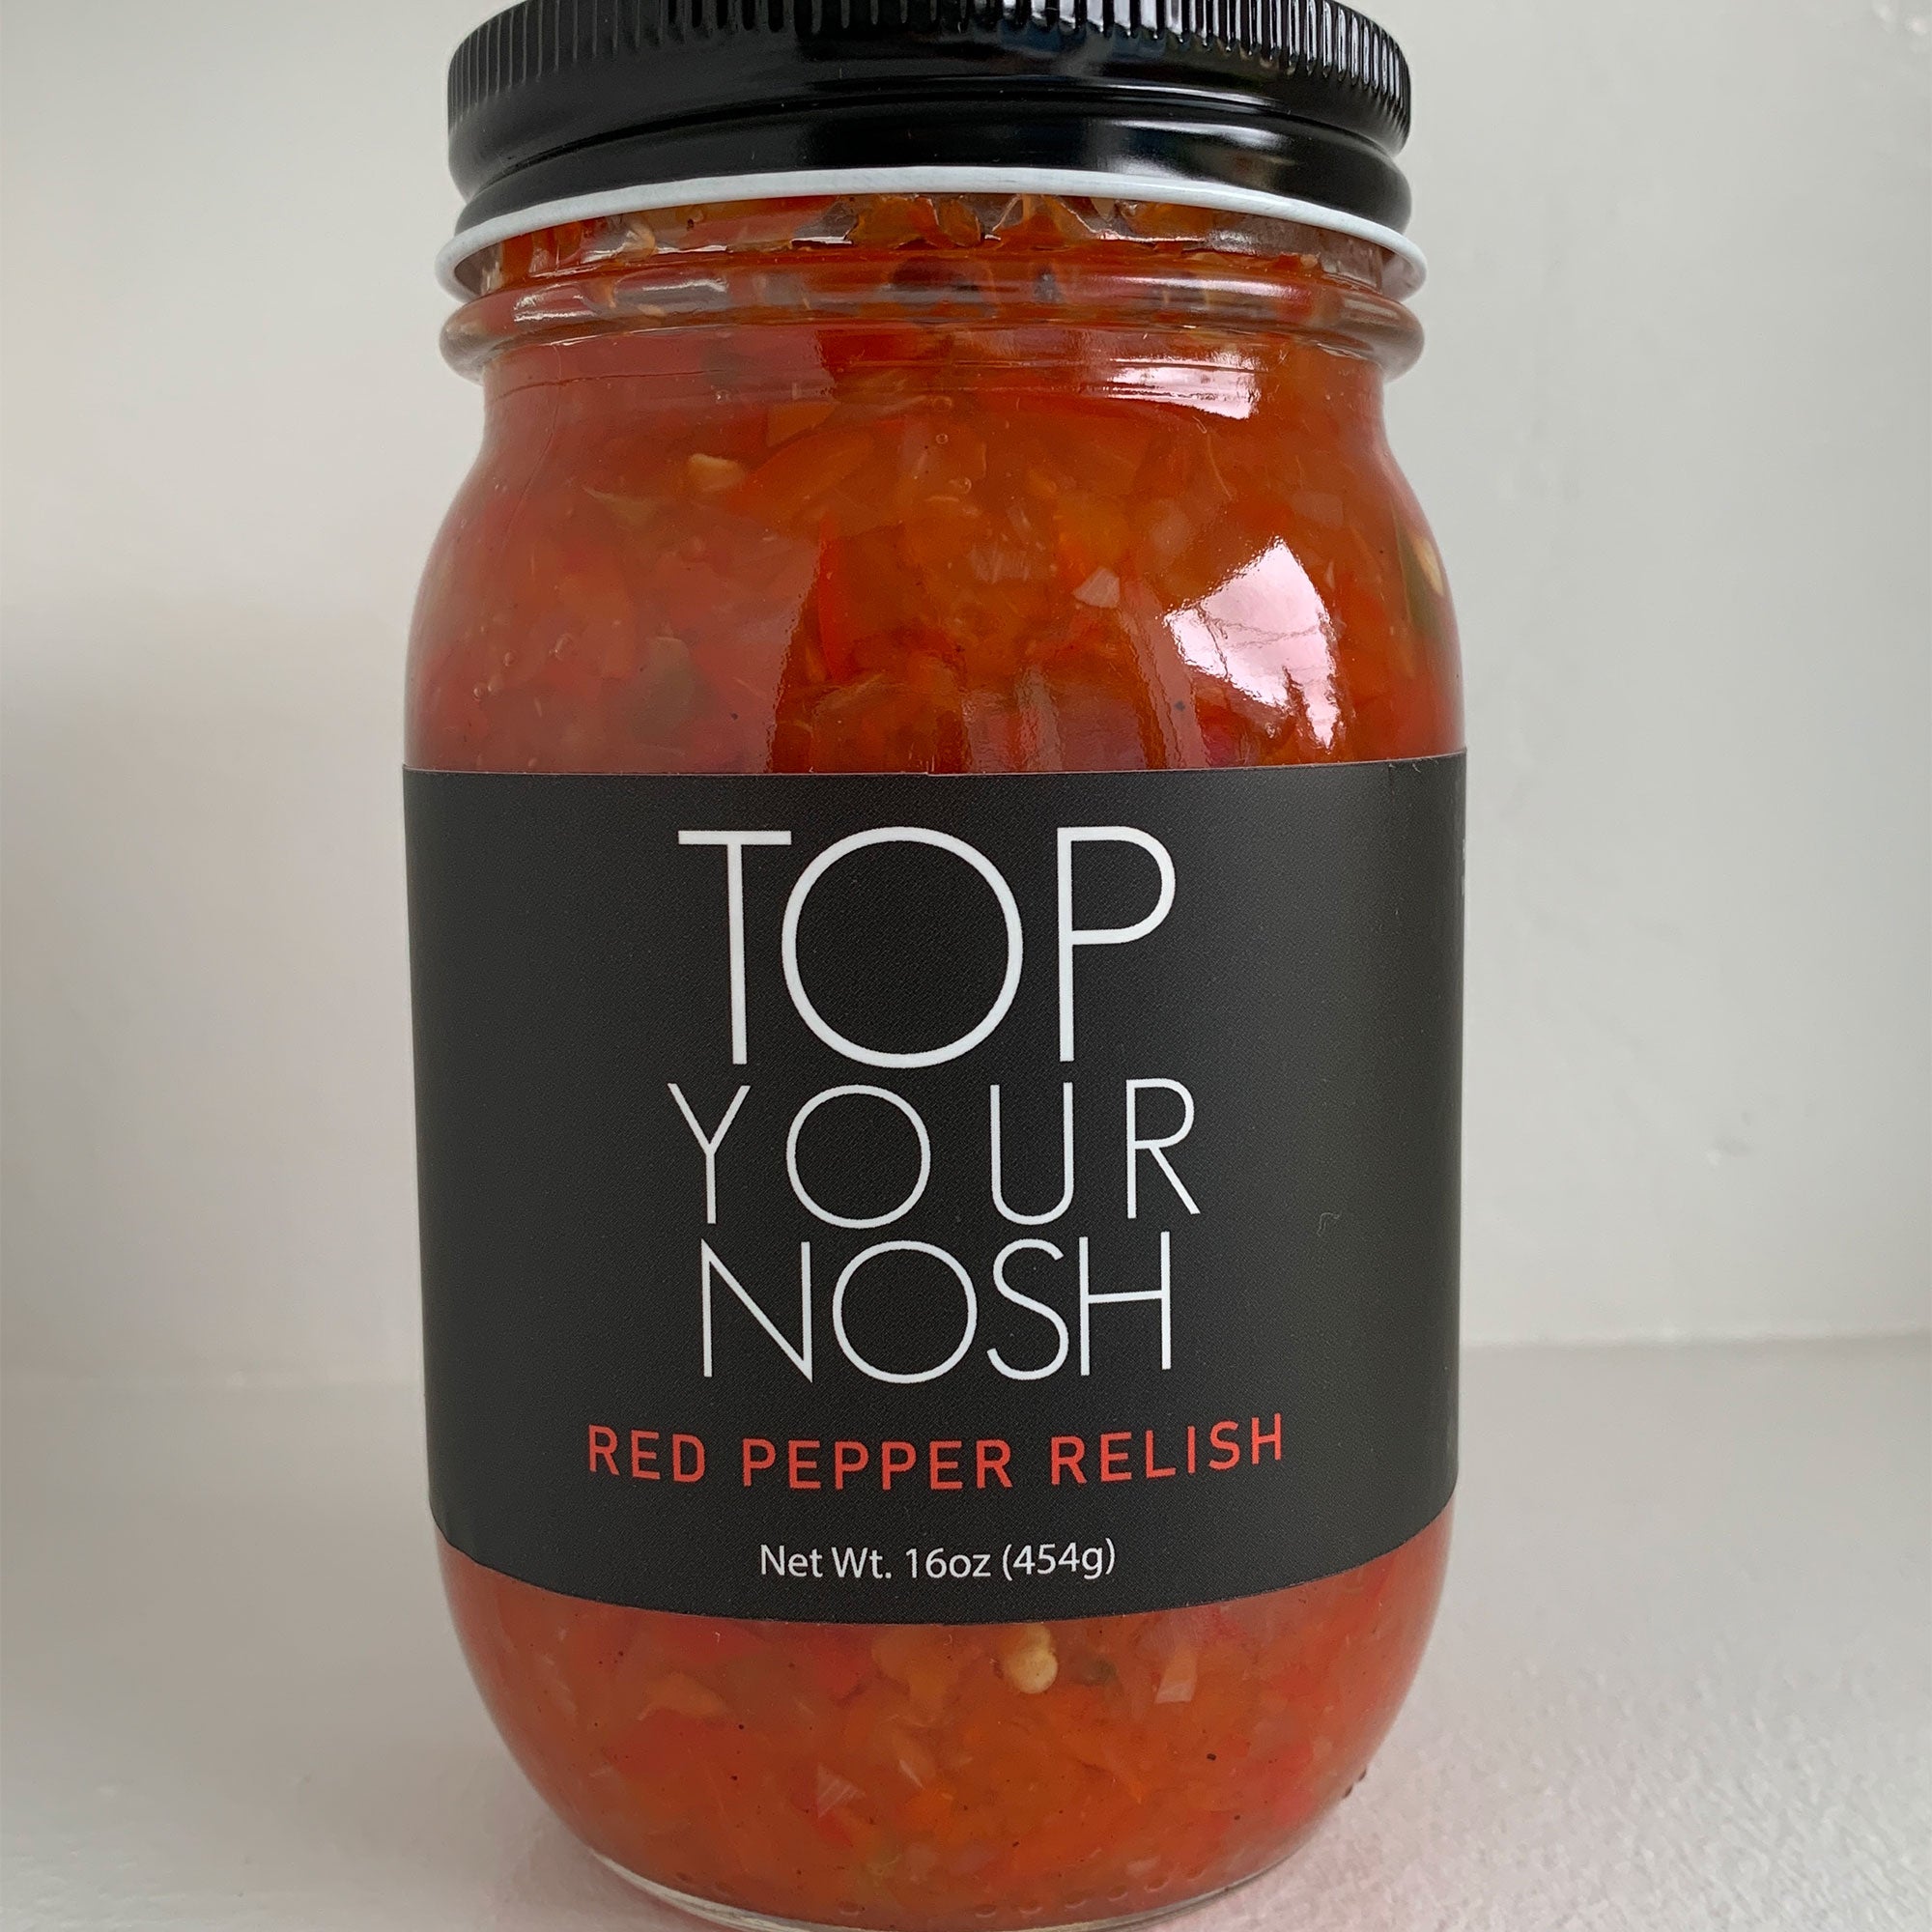 Red Pepper Relish from Top Your Nosh | Relish and Salsa Specialty Products